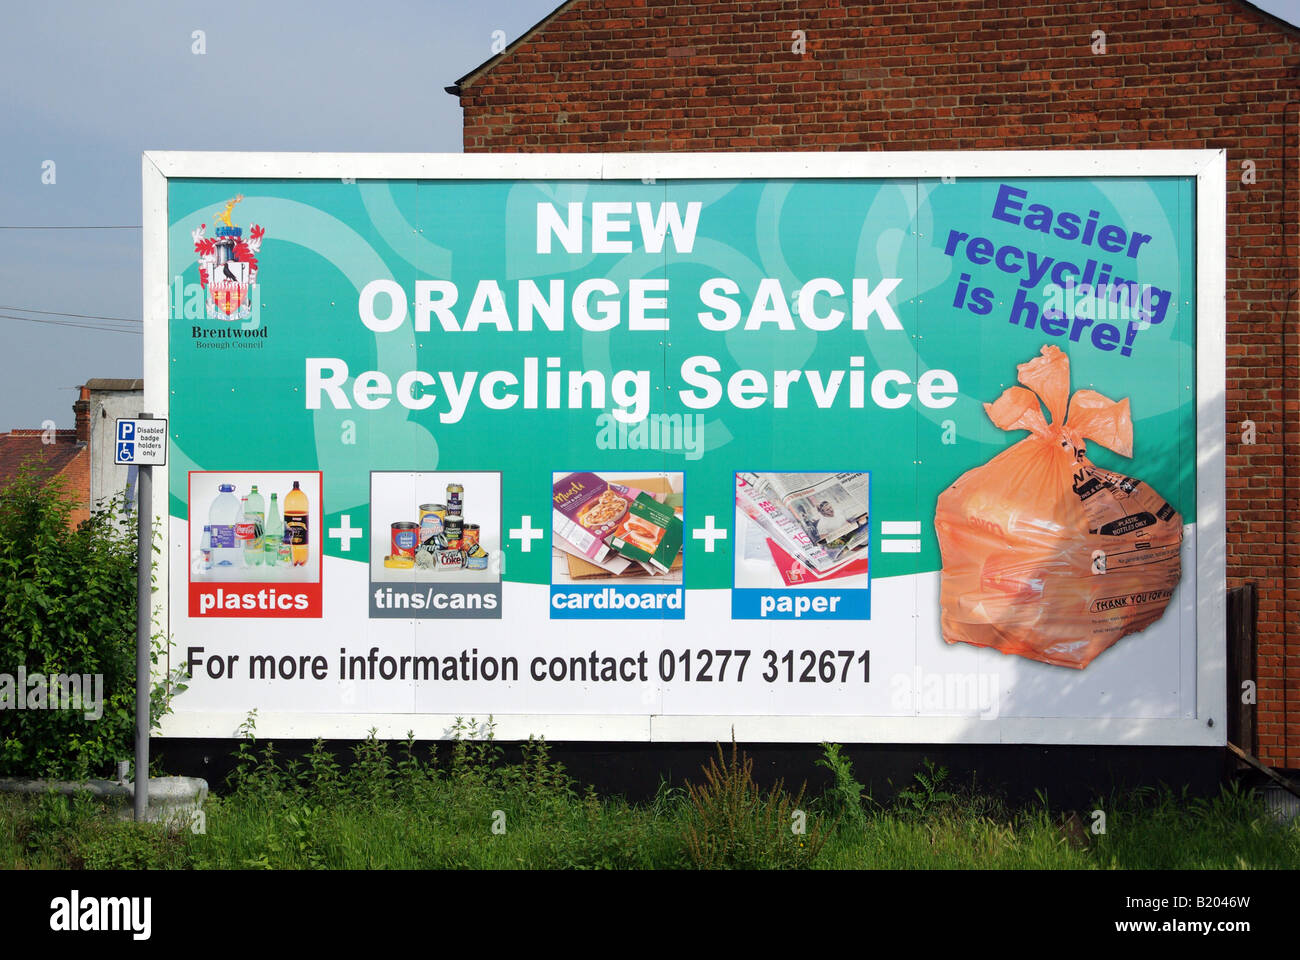 Brentwood Borough Council advertising billboard in the town center to promote household rubbish recycling in orange sacks Stock Photo